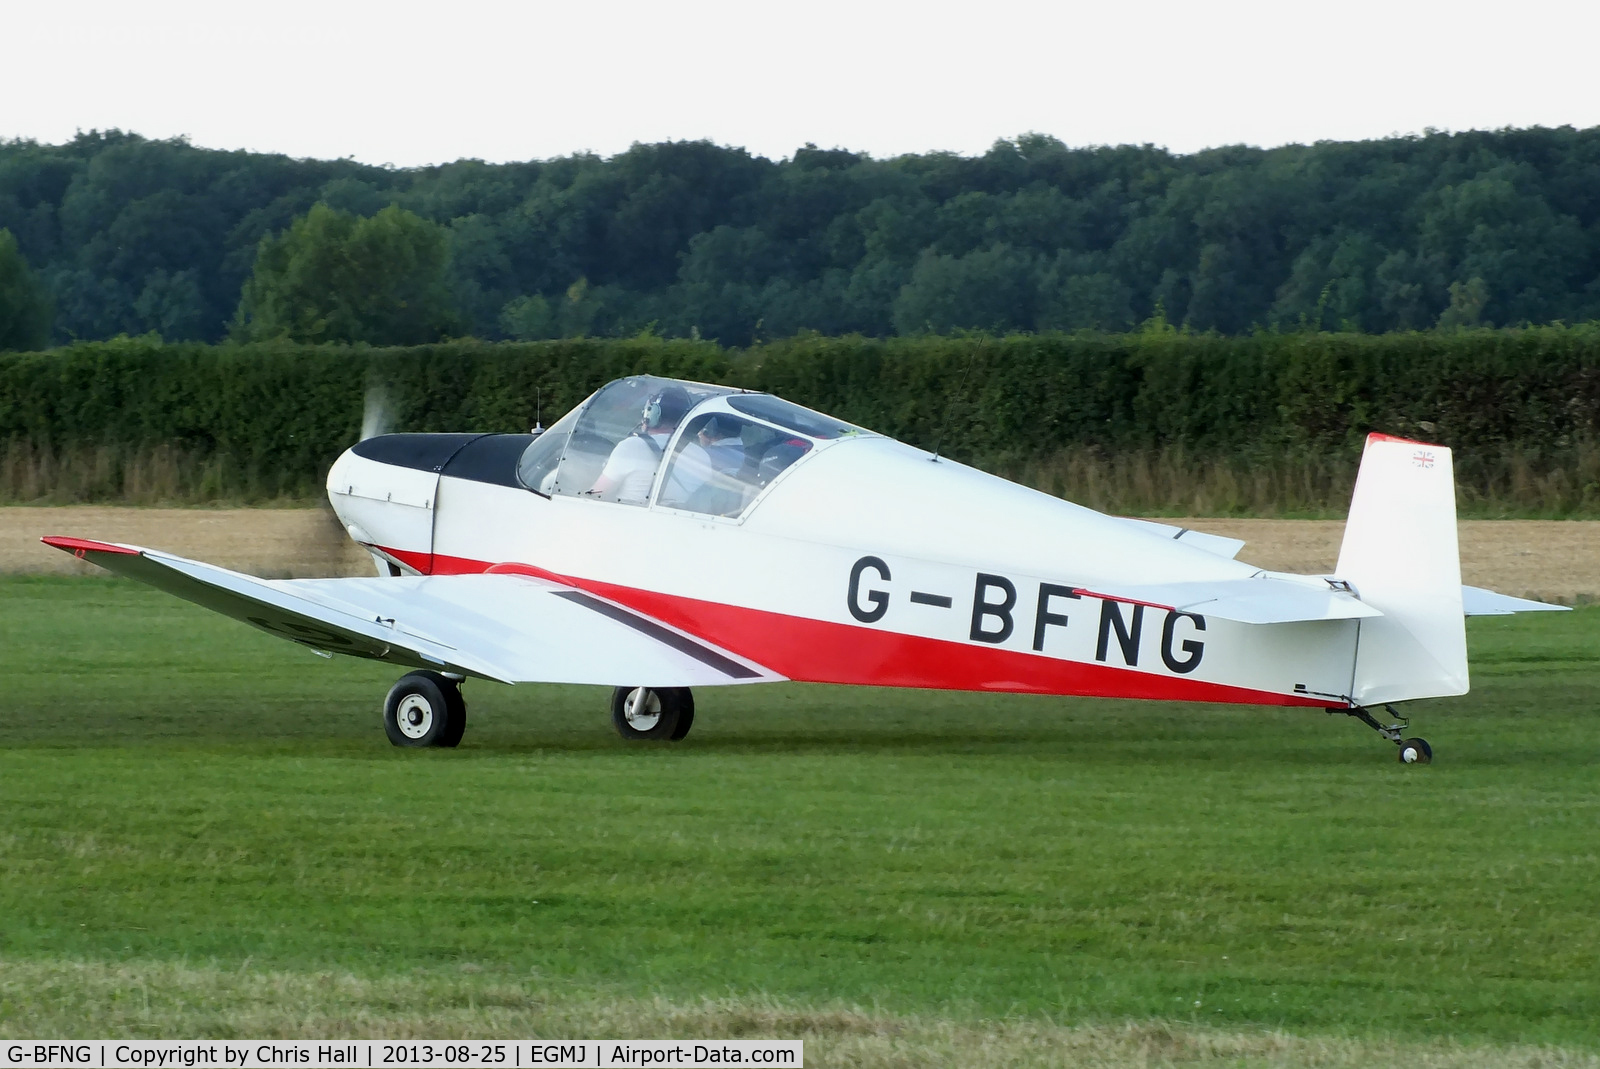 G-BFNG, 1966 Jodel D-112 C/N 1321, at the Little Gransden Air & Vintage Vehicle Show